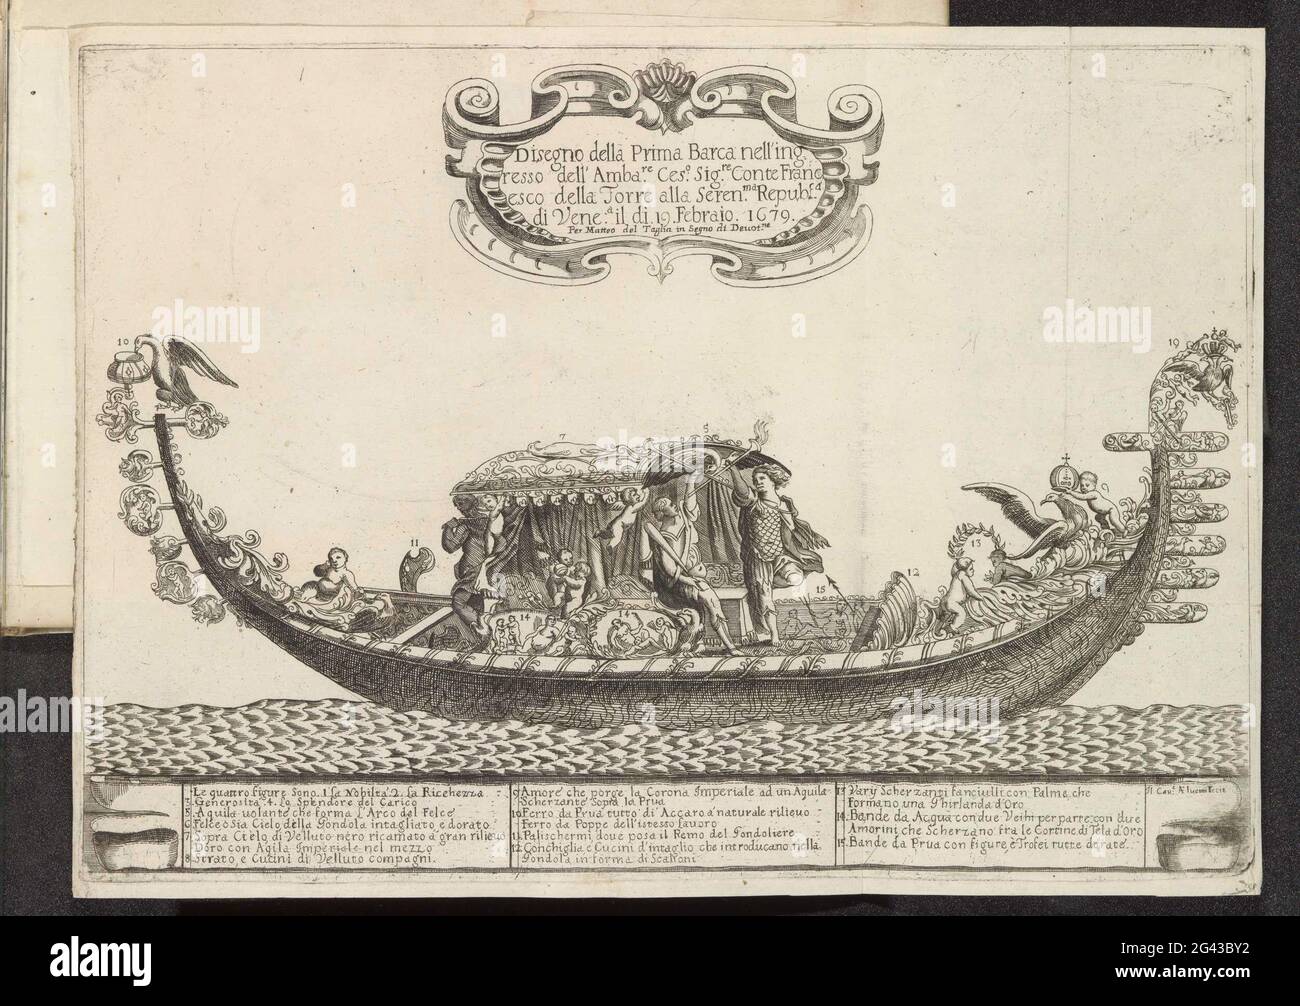 Gondola with allegorical figures; Disegno della Prima Barca Nell'ingresso  dell'amba.re (...). Ornamented gondola with allegorical figures. Title in  cartouche mid up. Explanatory list of numbers in undermarge. The print is  part of